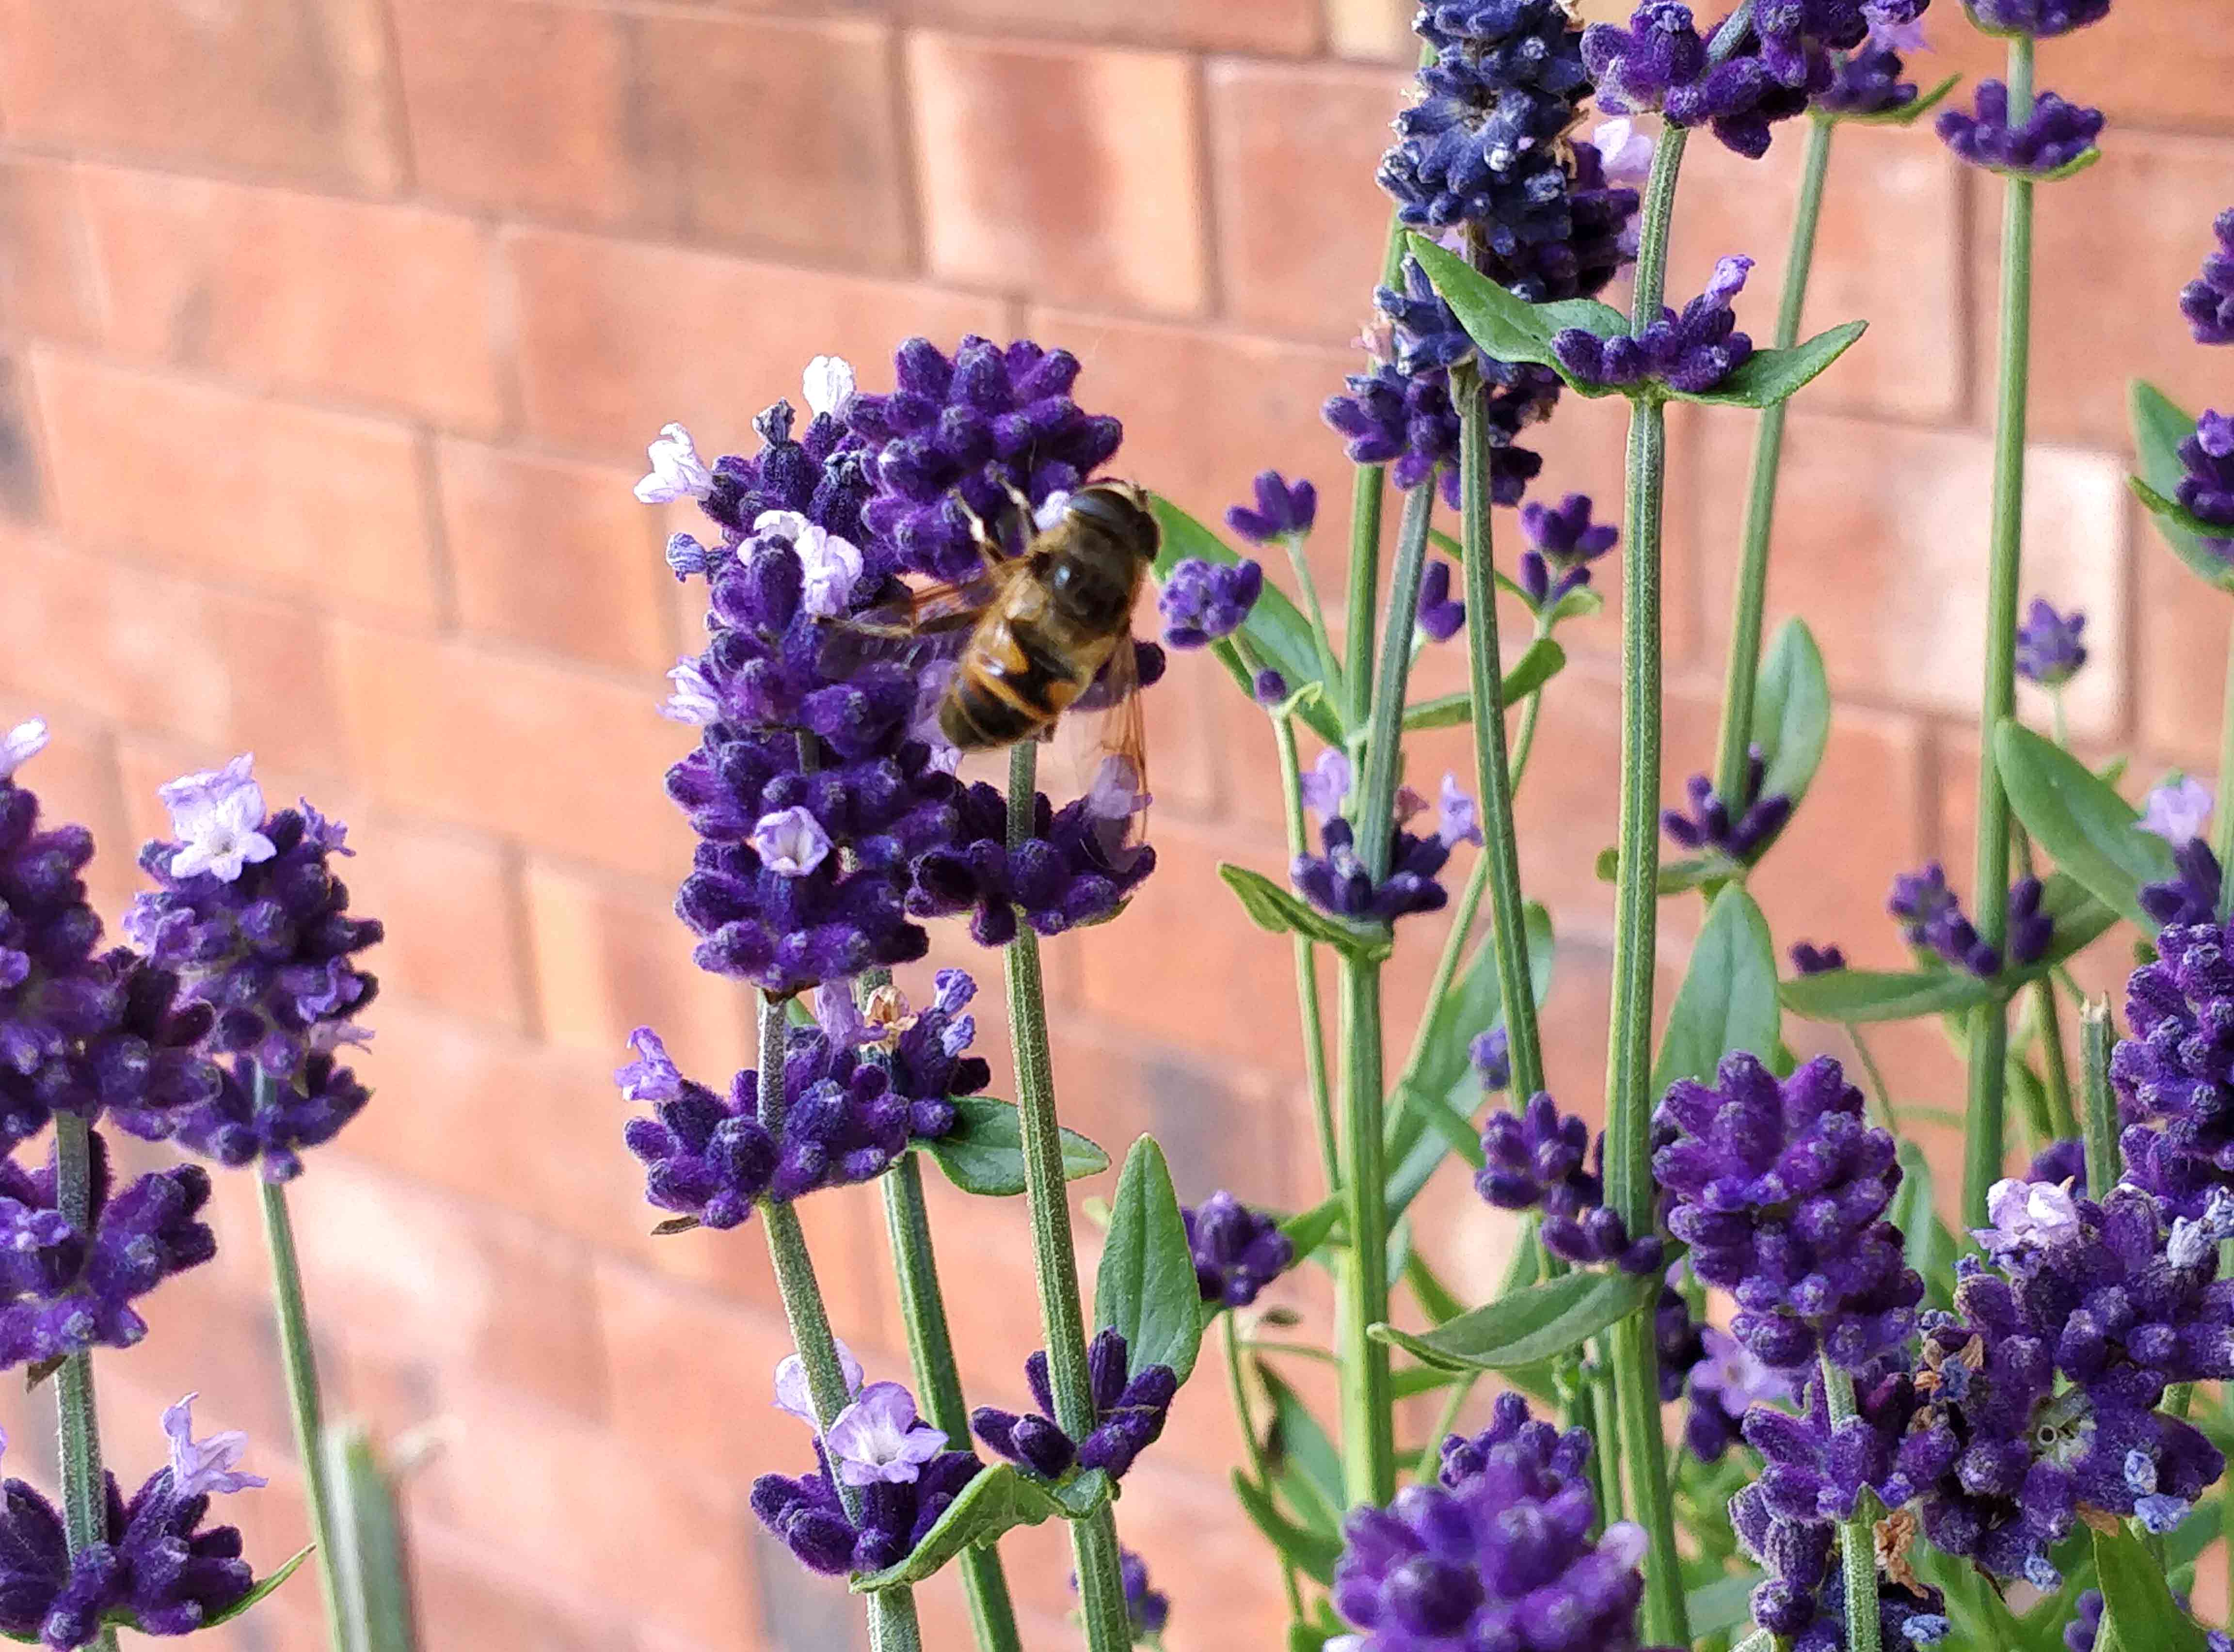 Lavender (Lavandula spp.) flowers with a bee